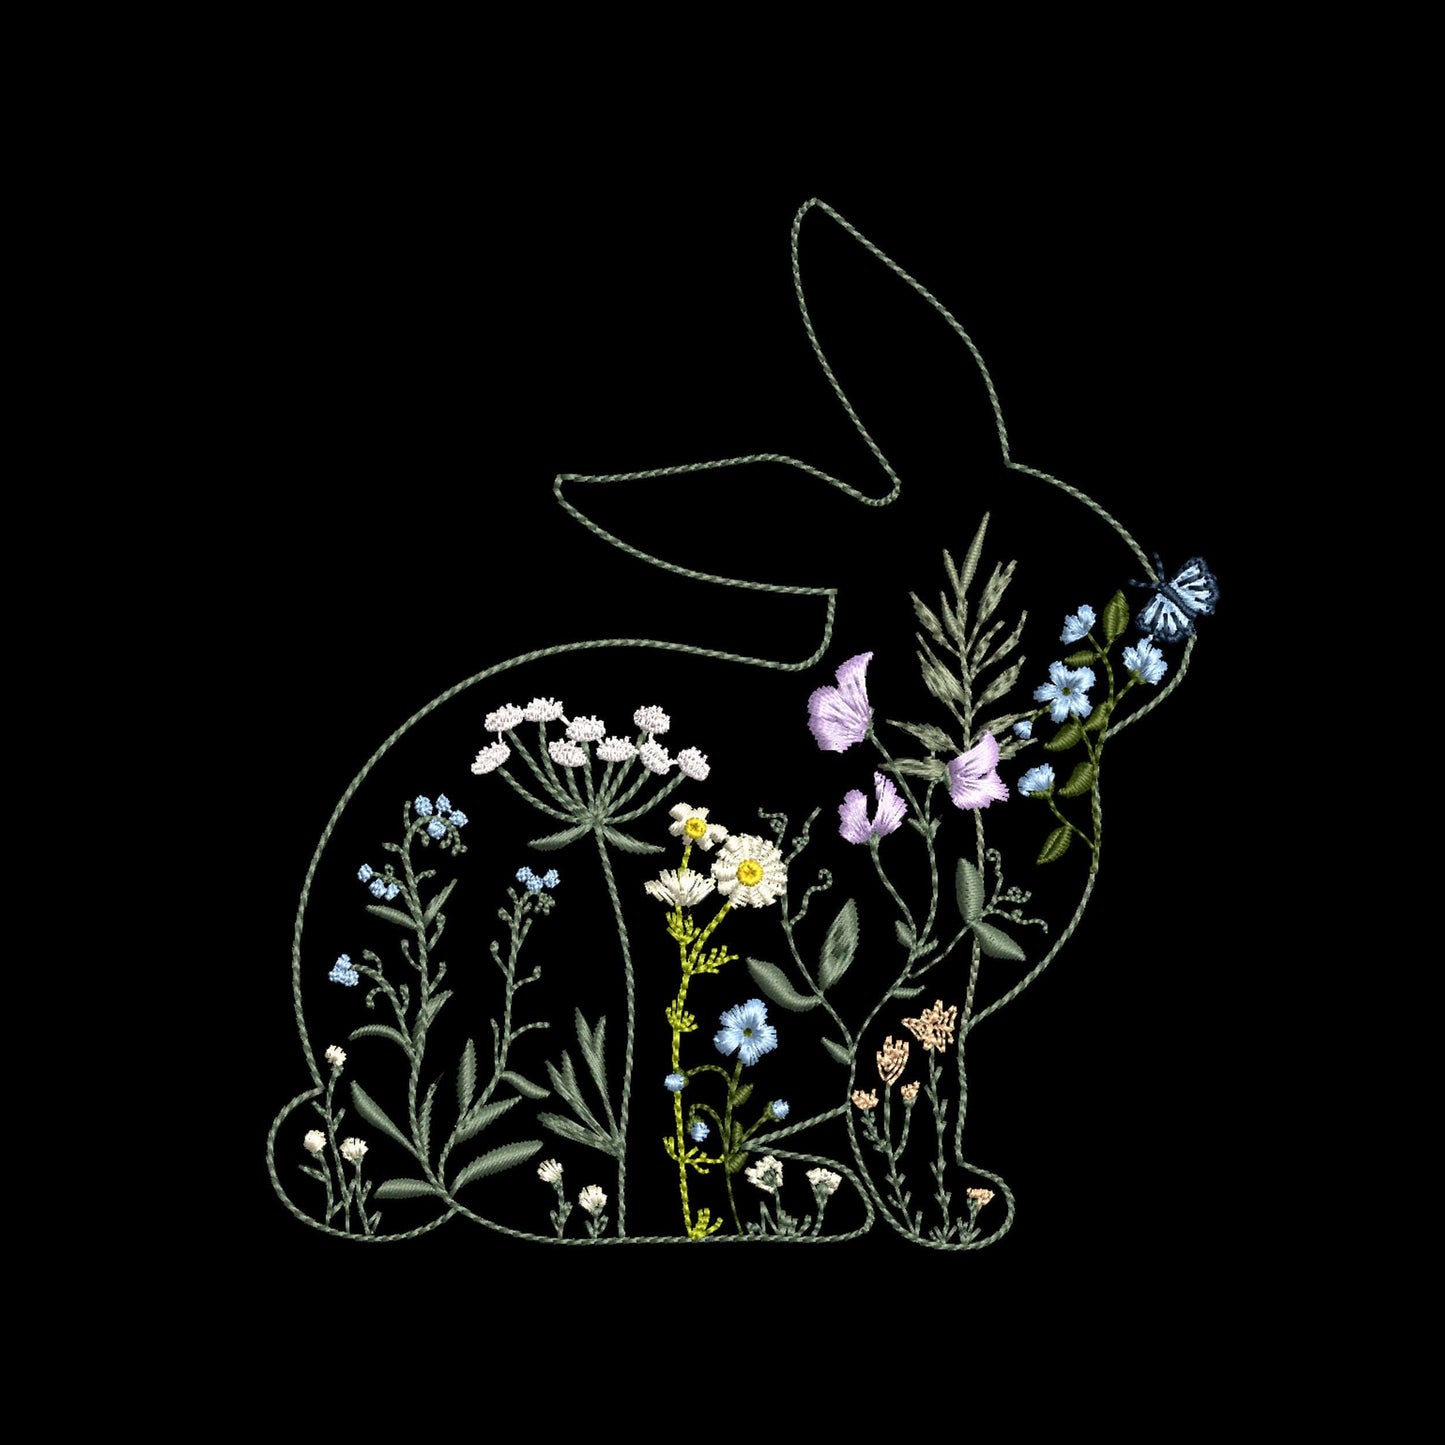 Easter Wildflower Bunny Machine Embroidery Design on black background